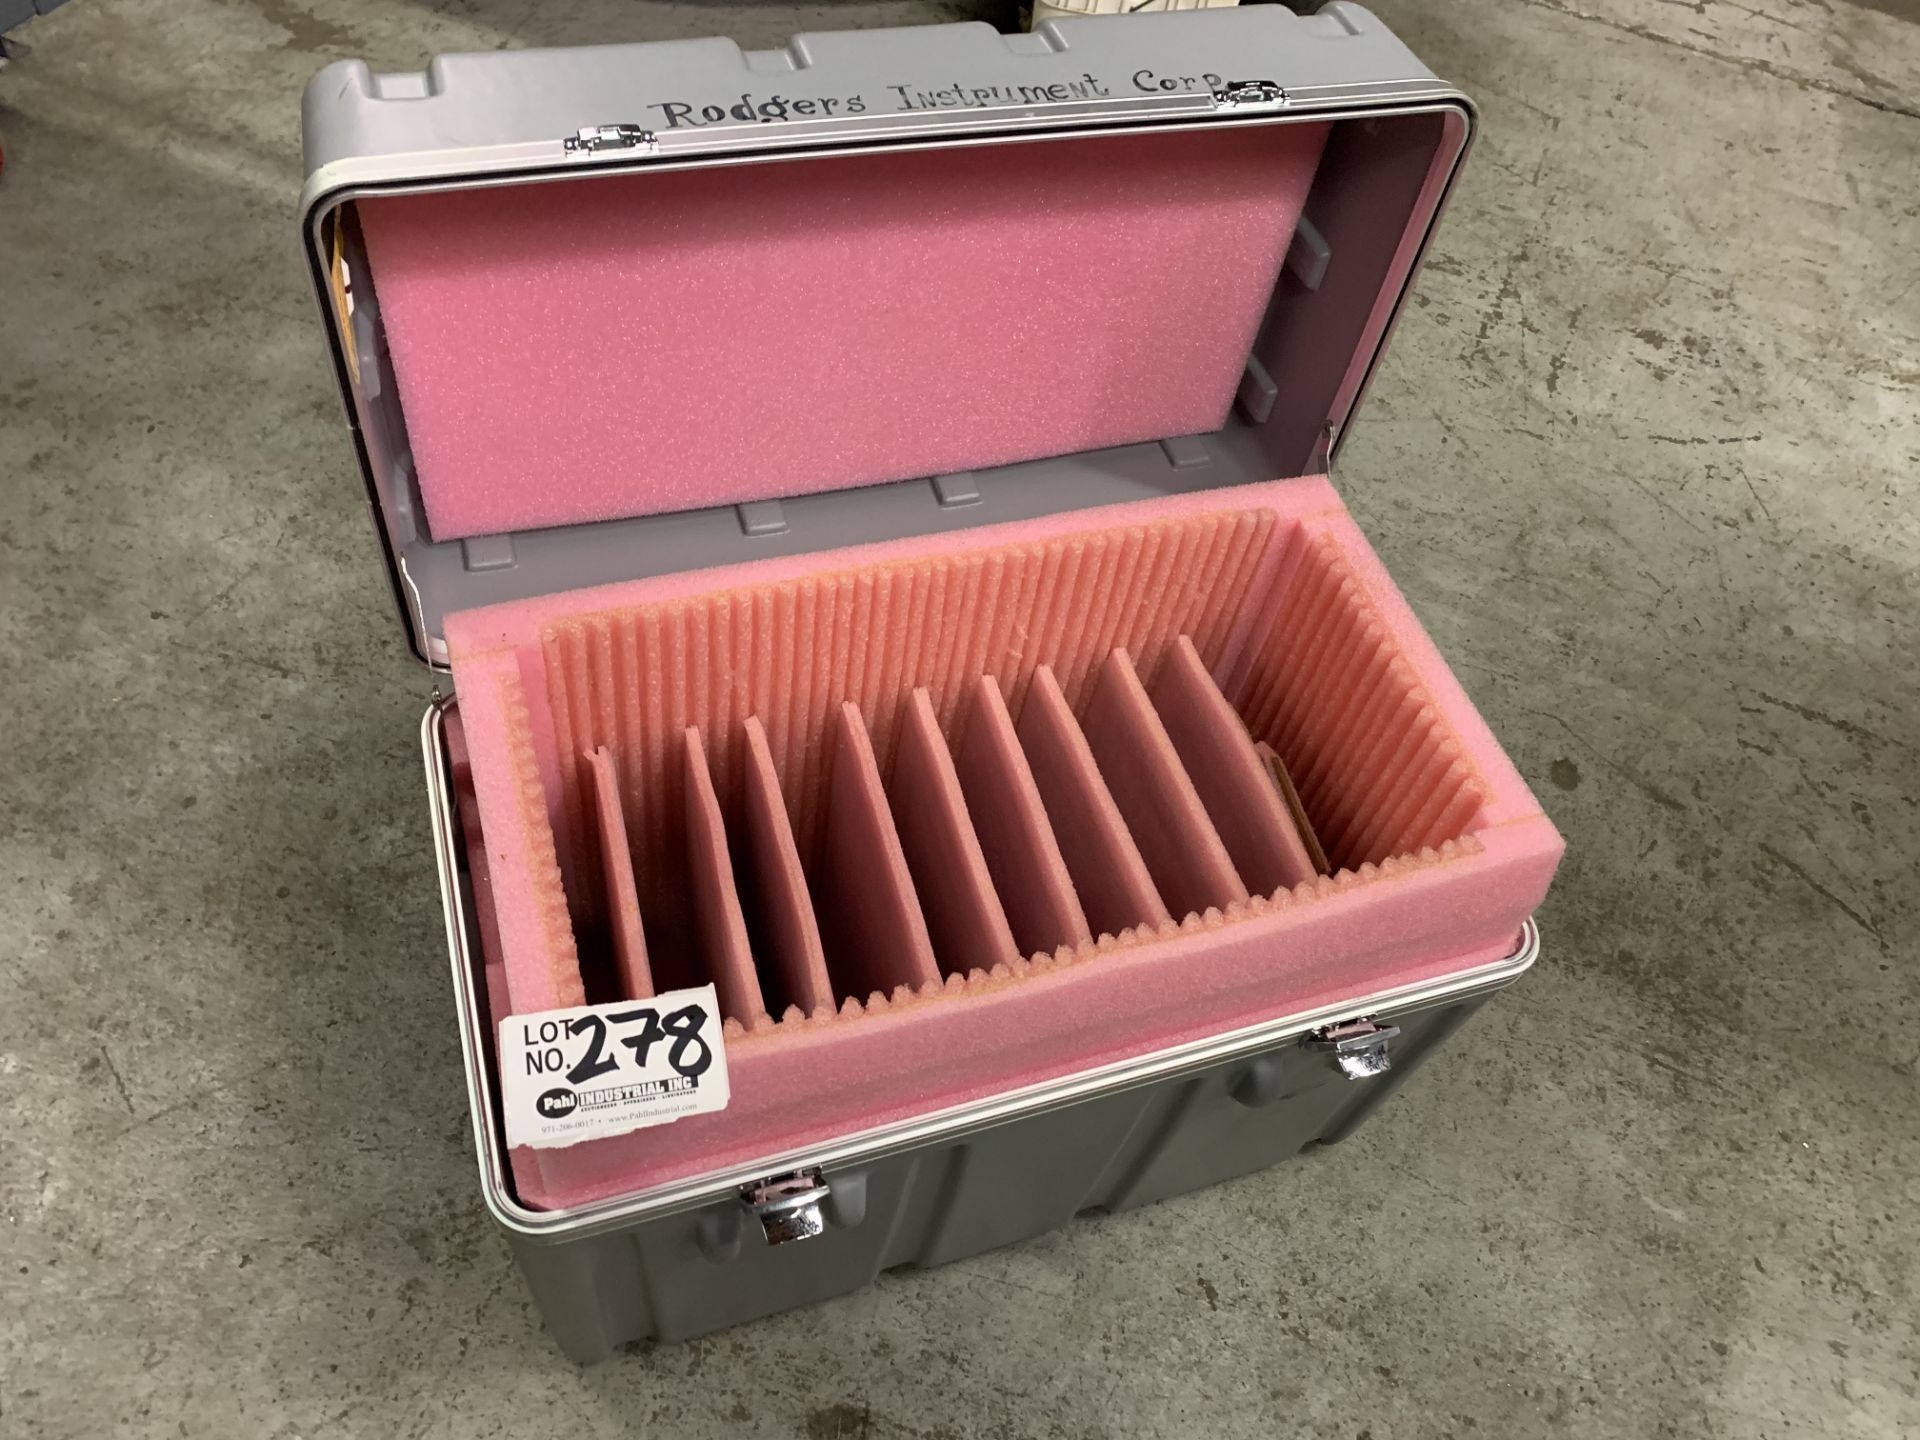 Heavy Duty Plastic Lock Box with Foam Interior and Dividers - Image 2 of 2